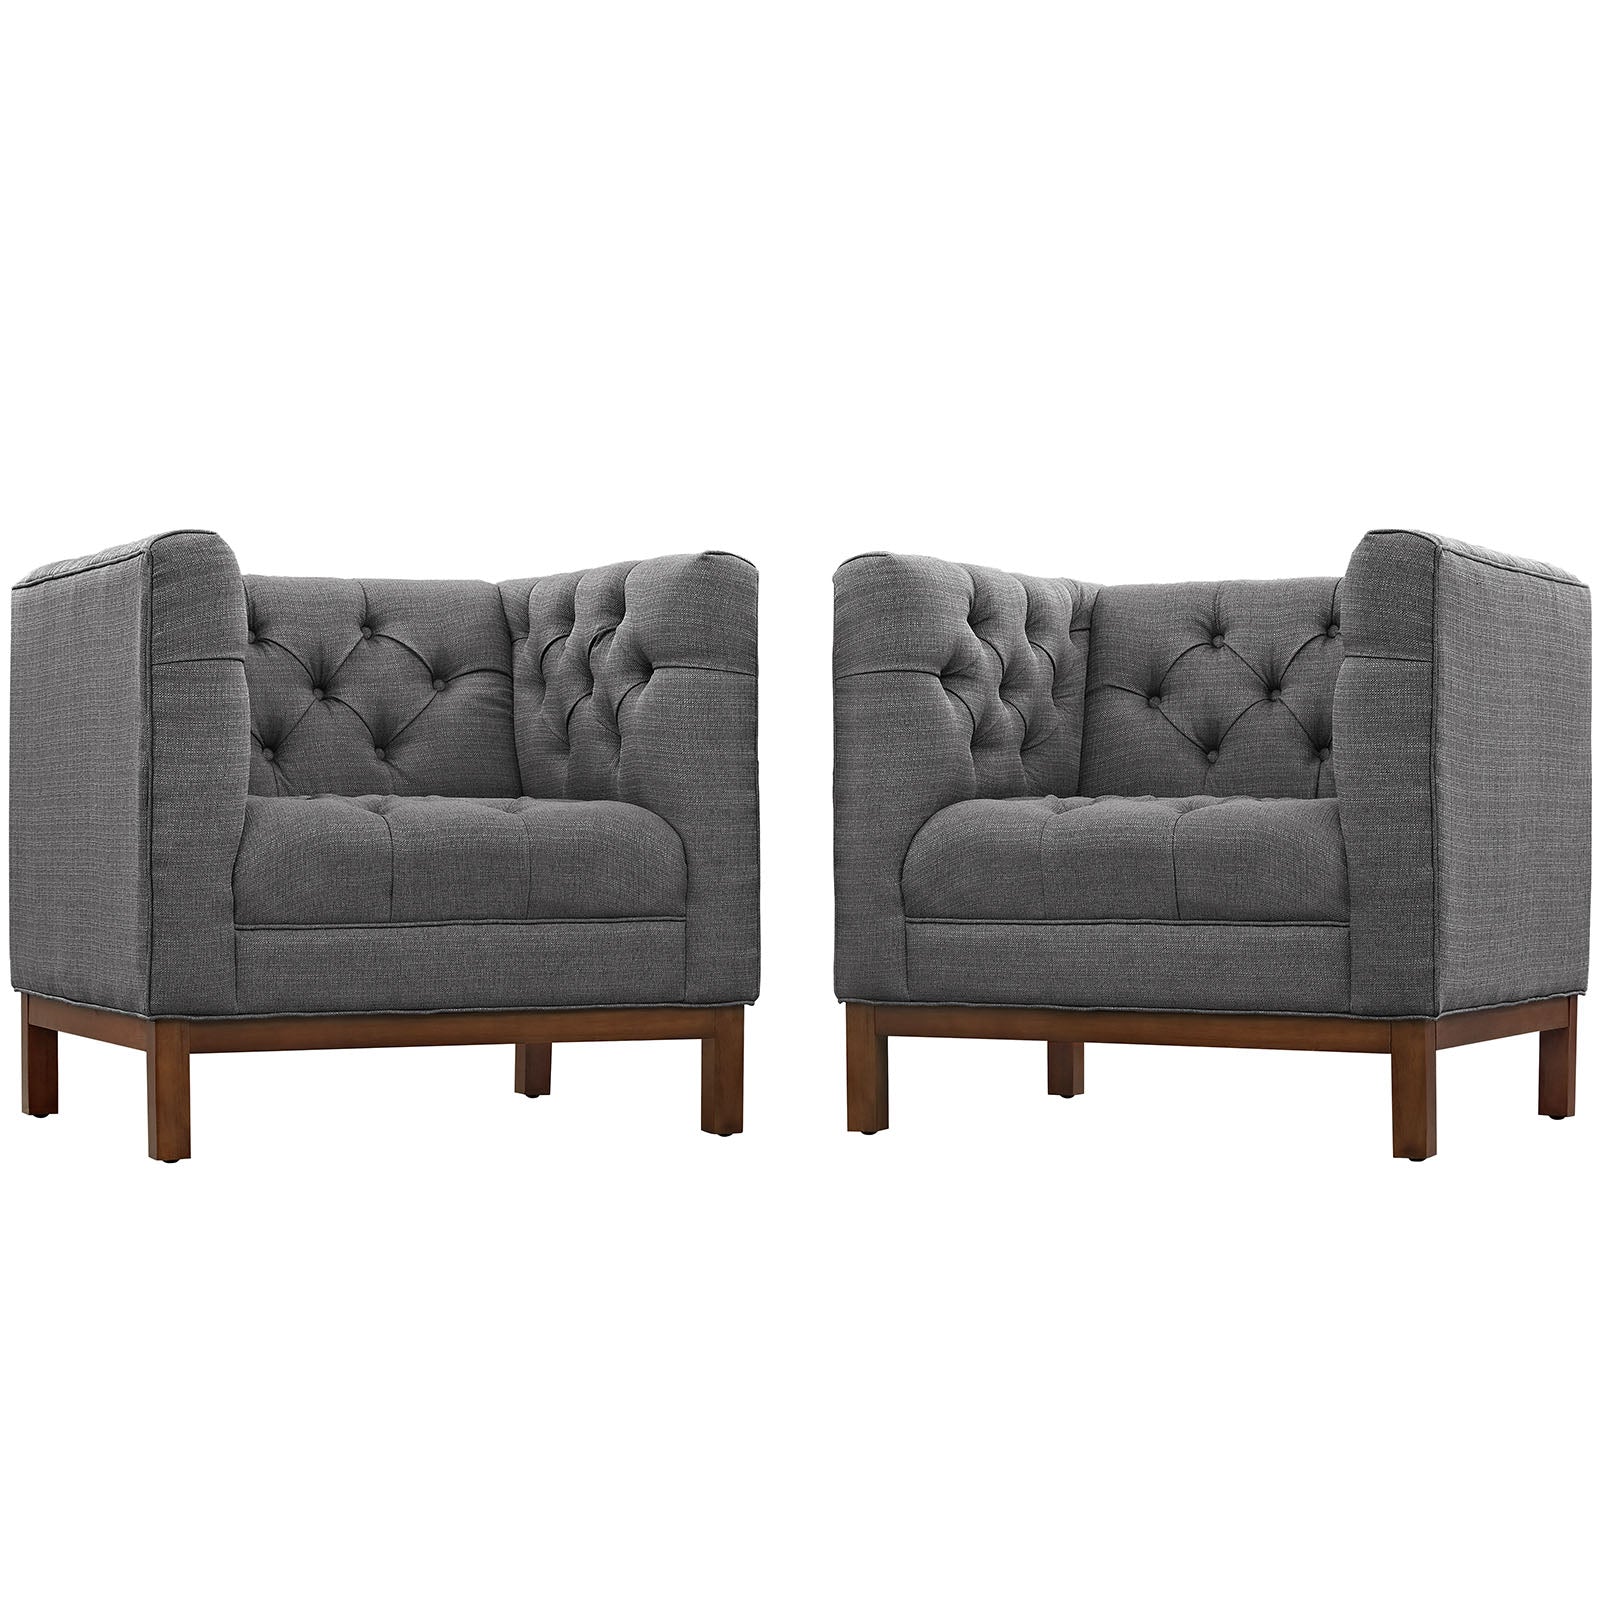 Modway Living Room Sets - Panache Living Room Set Upholstered Fabric Gray ( Set of 2 )